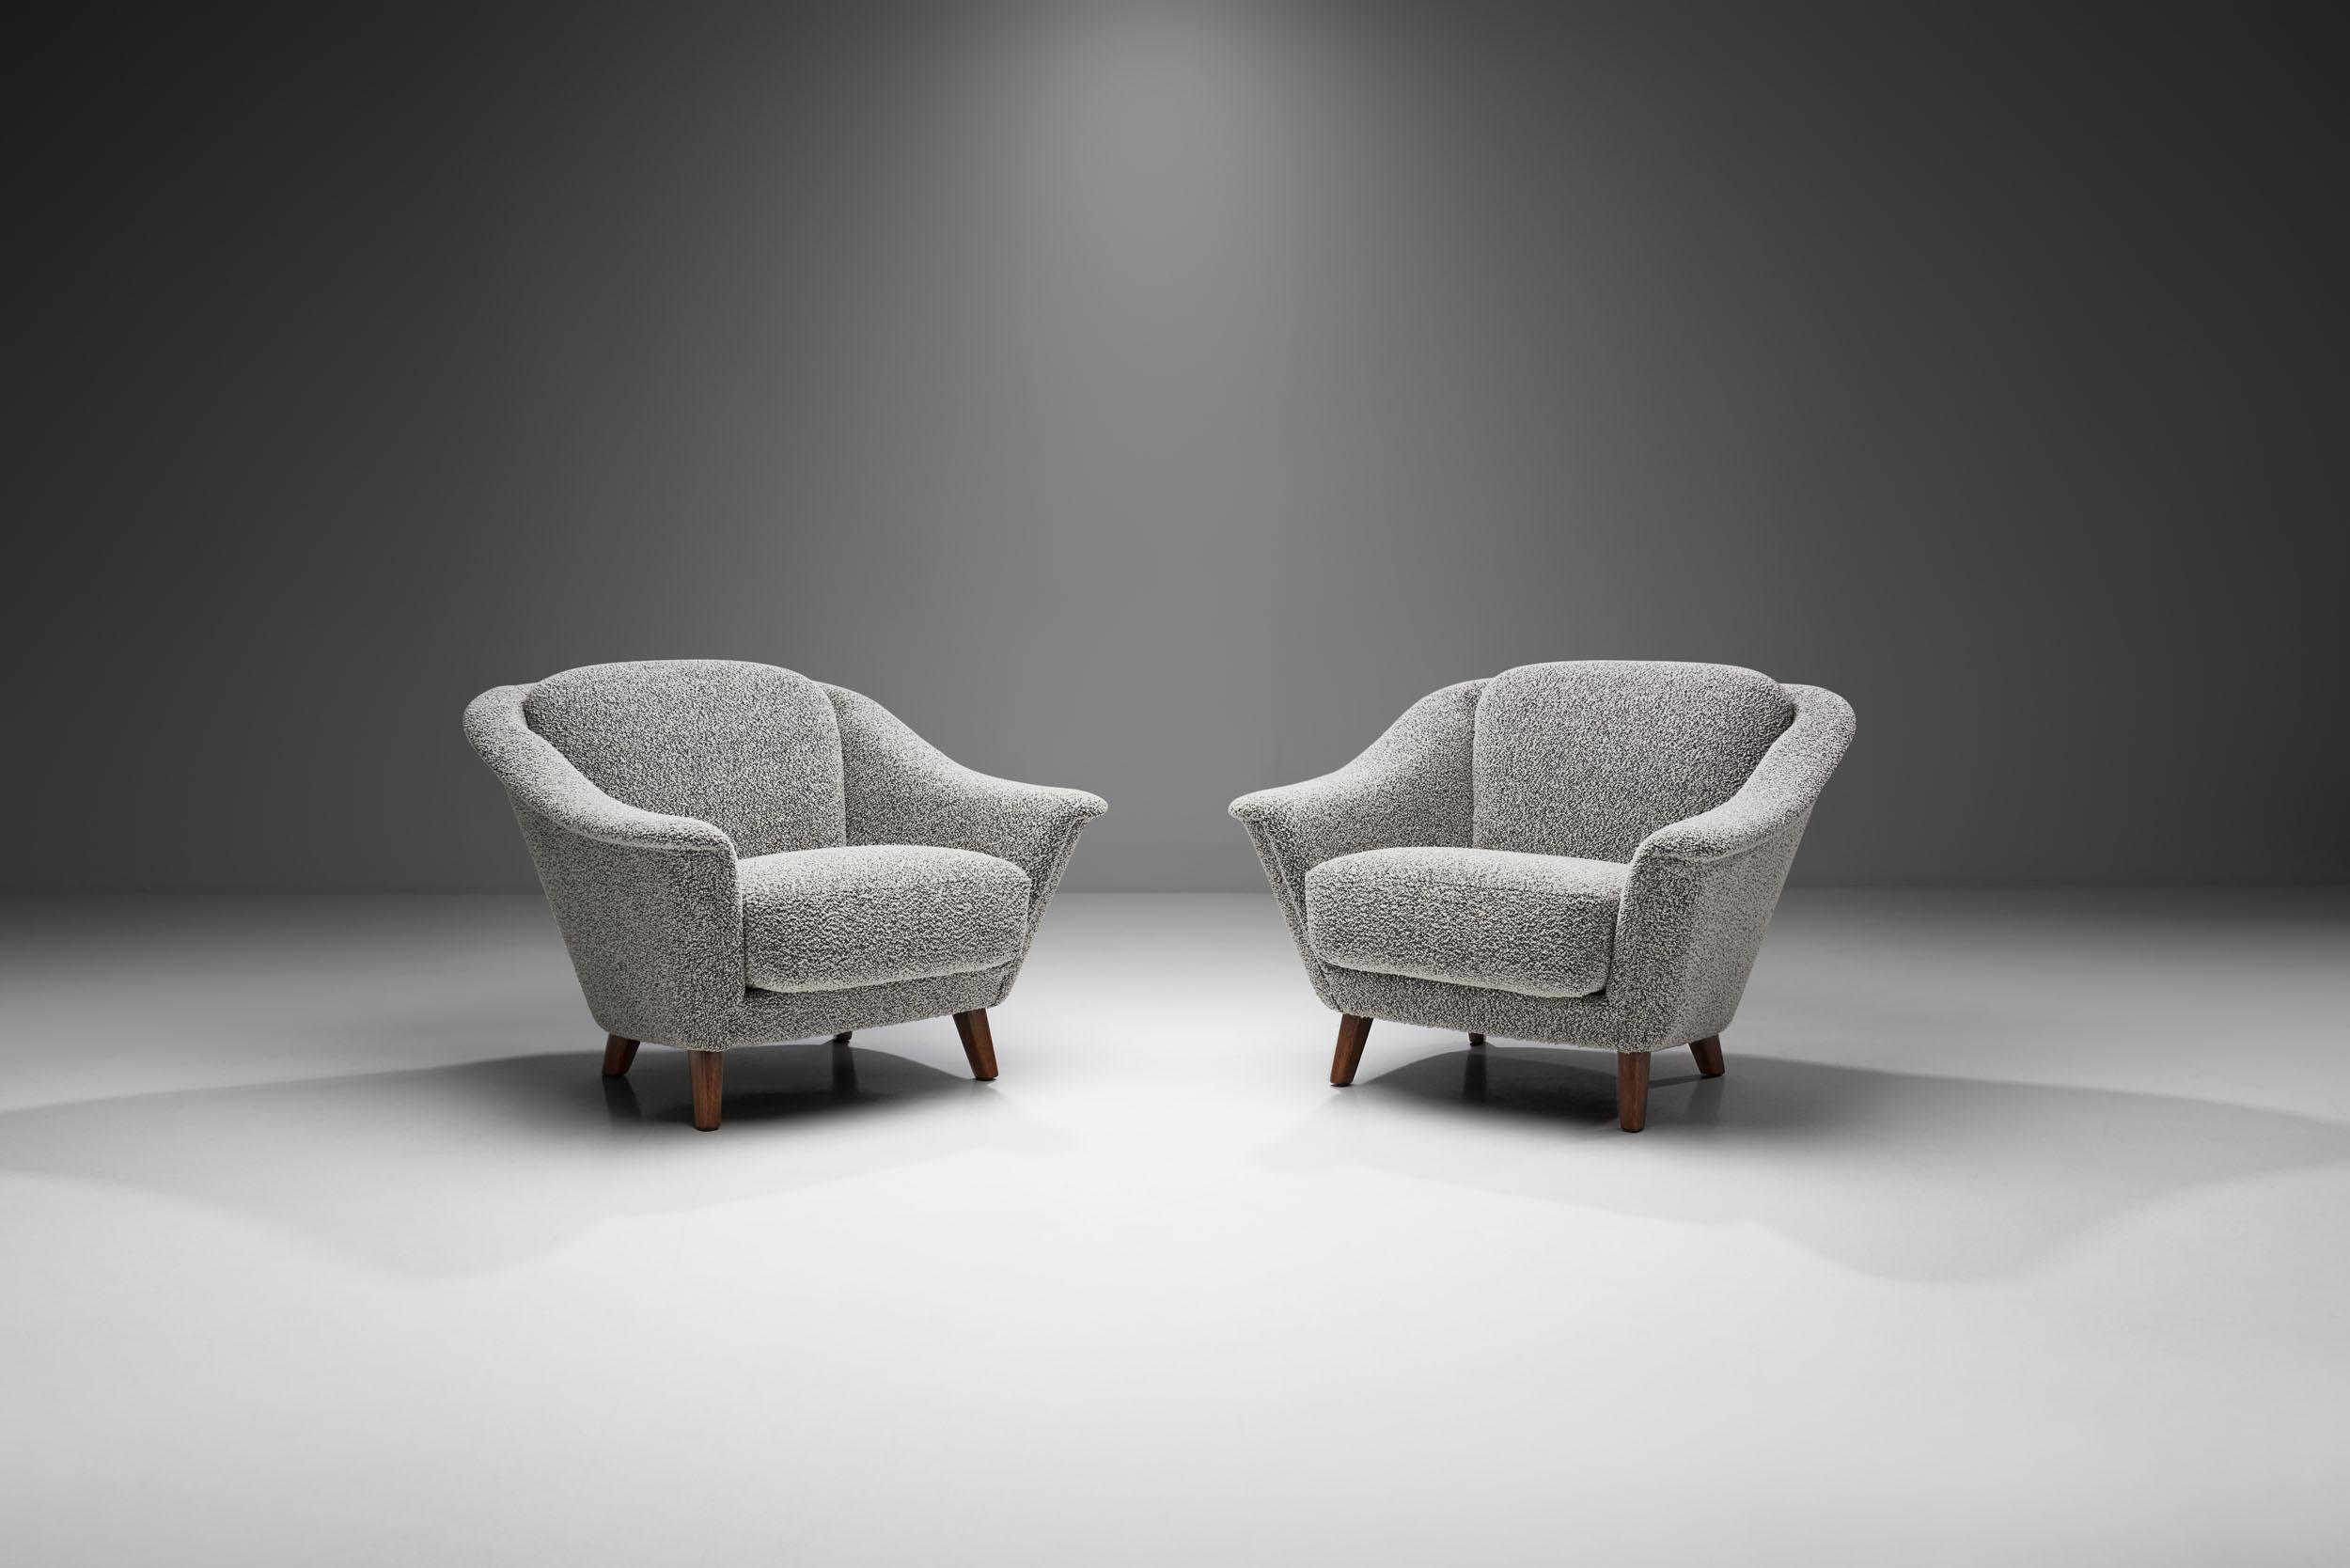 This pleasantly peculiar pair of lounge chairs by the famous manufactory, Wilhelm Knoll, is a stunning reminder that German design played an important role in the history of furniture design. From the Thonet chair to the Bauhaus, post-war German